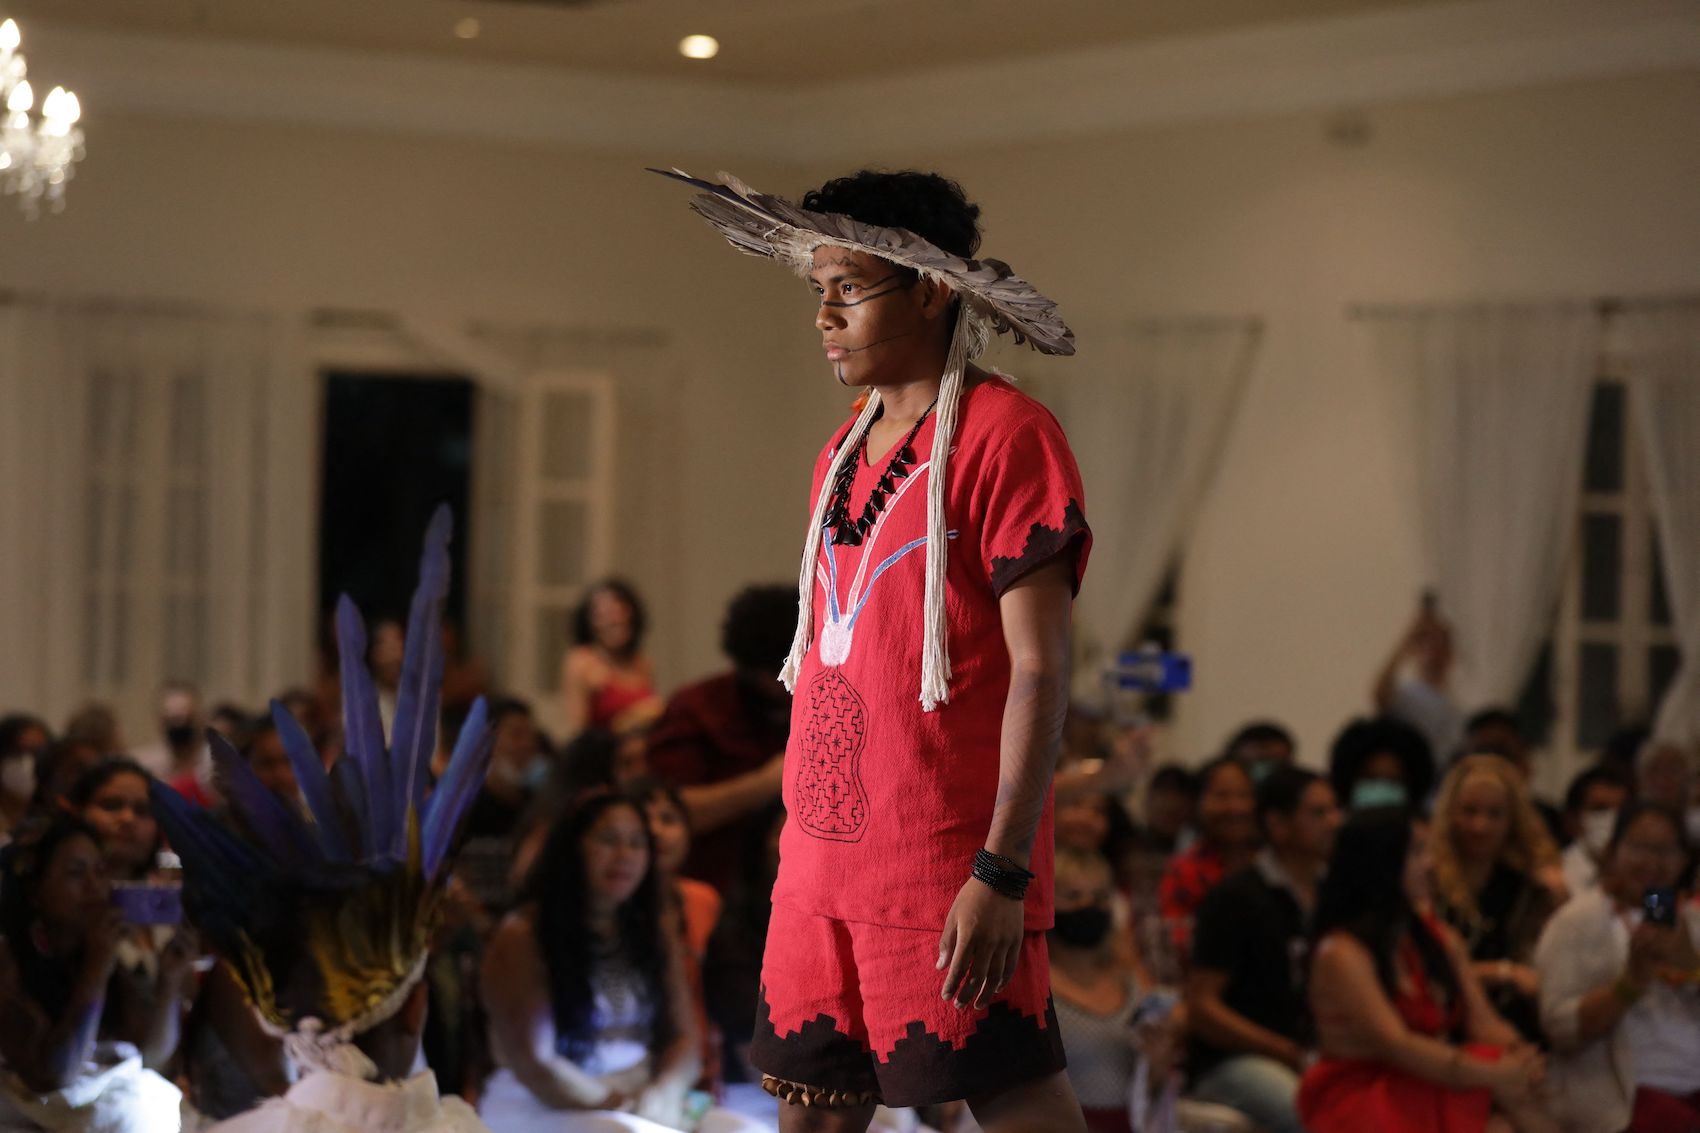 An indigenous model presents a creation during a fashion event in Manaus, Amazonas state, Brazil